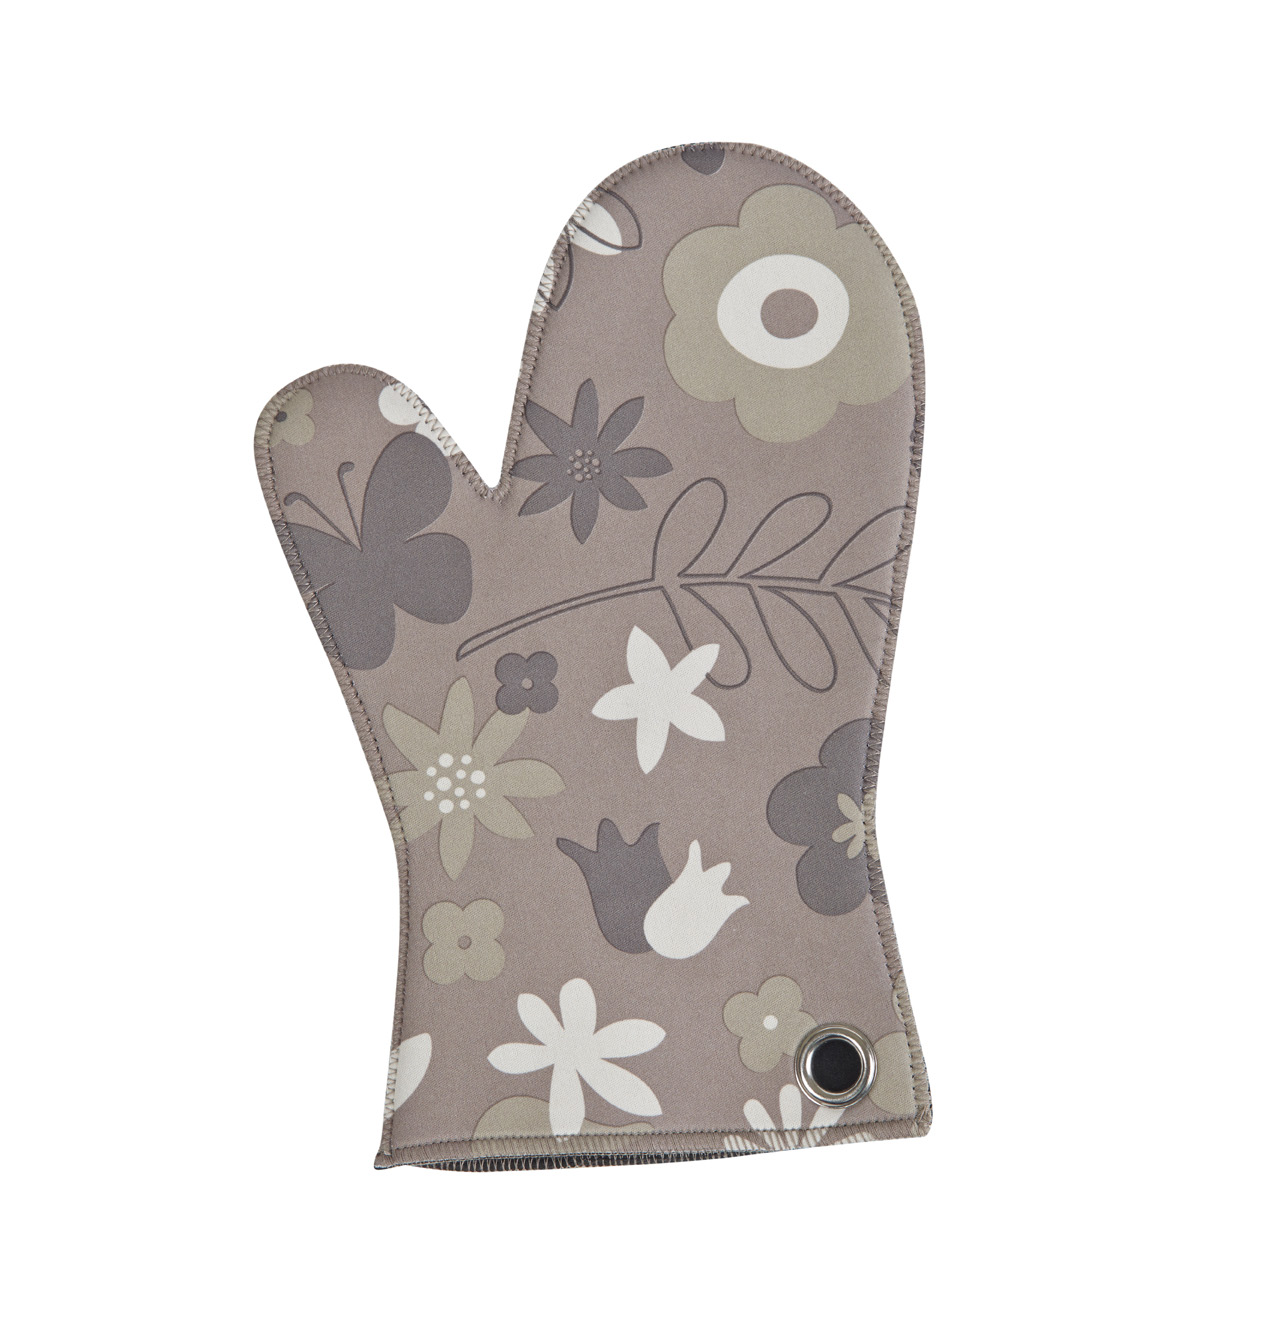 Glove floral CC neoprene  28.5x18.5cm, taupe,2mm+ 4mm photop